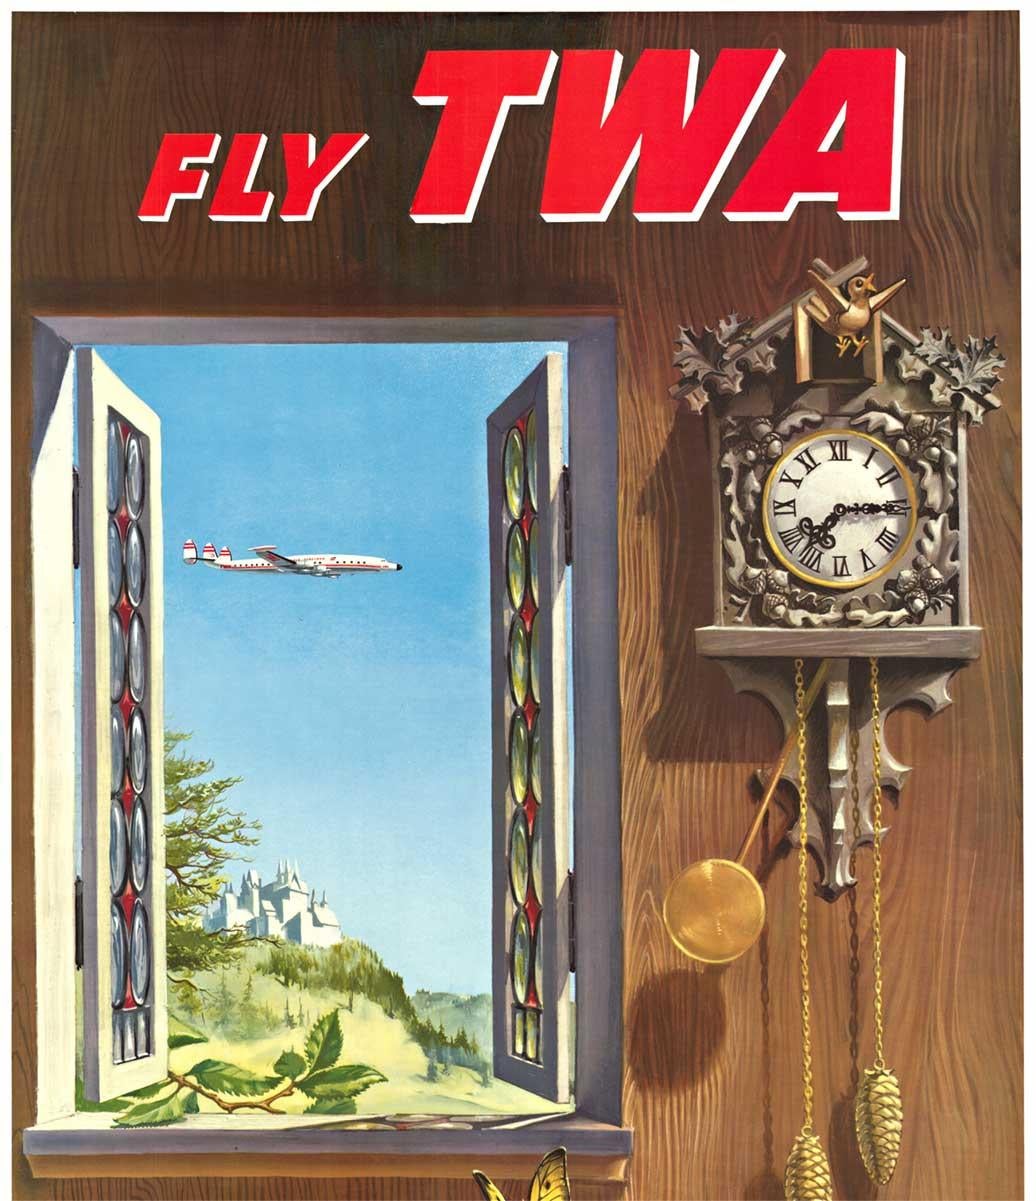 Original FLY TWA Germany, Constellation aircraft, vintage poster - American Realist Print by William Ward Beecher